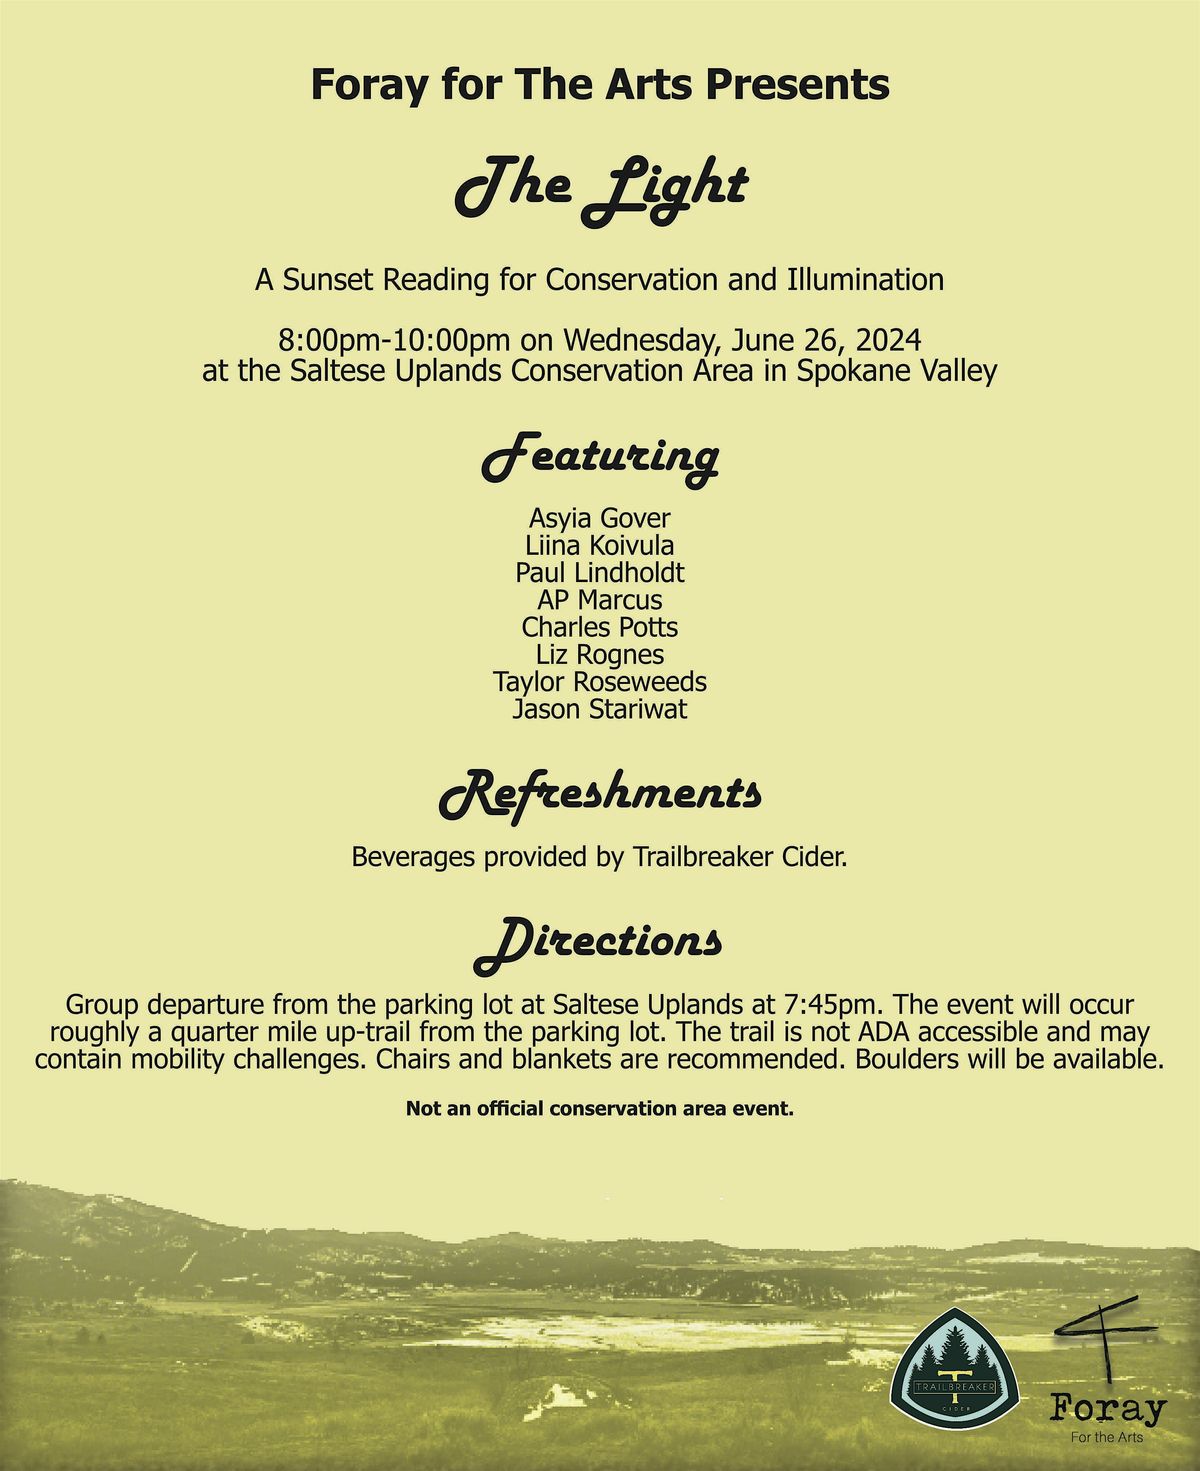 Foray for The Arts Presents: The Light: A Sunset Reading